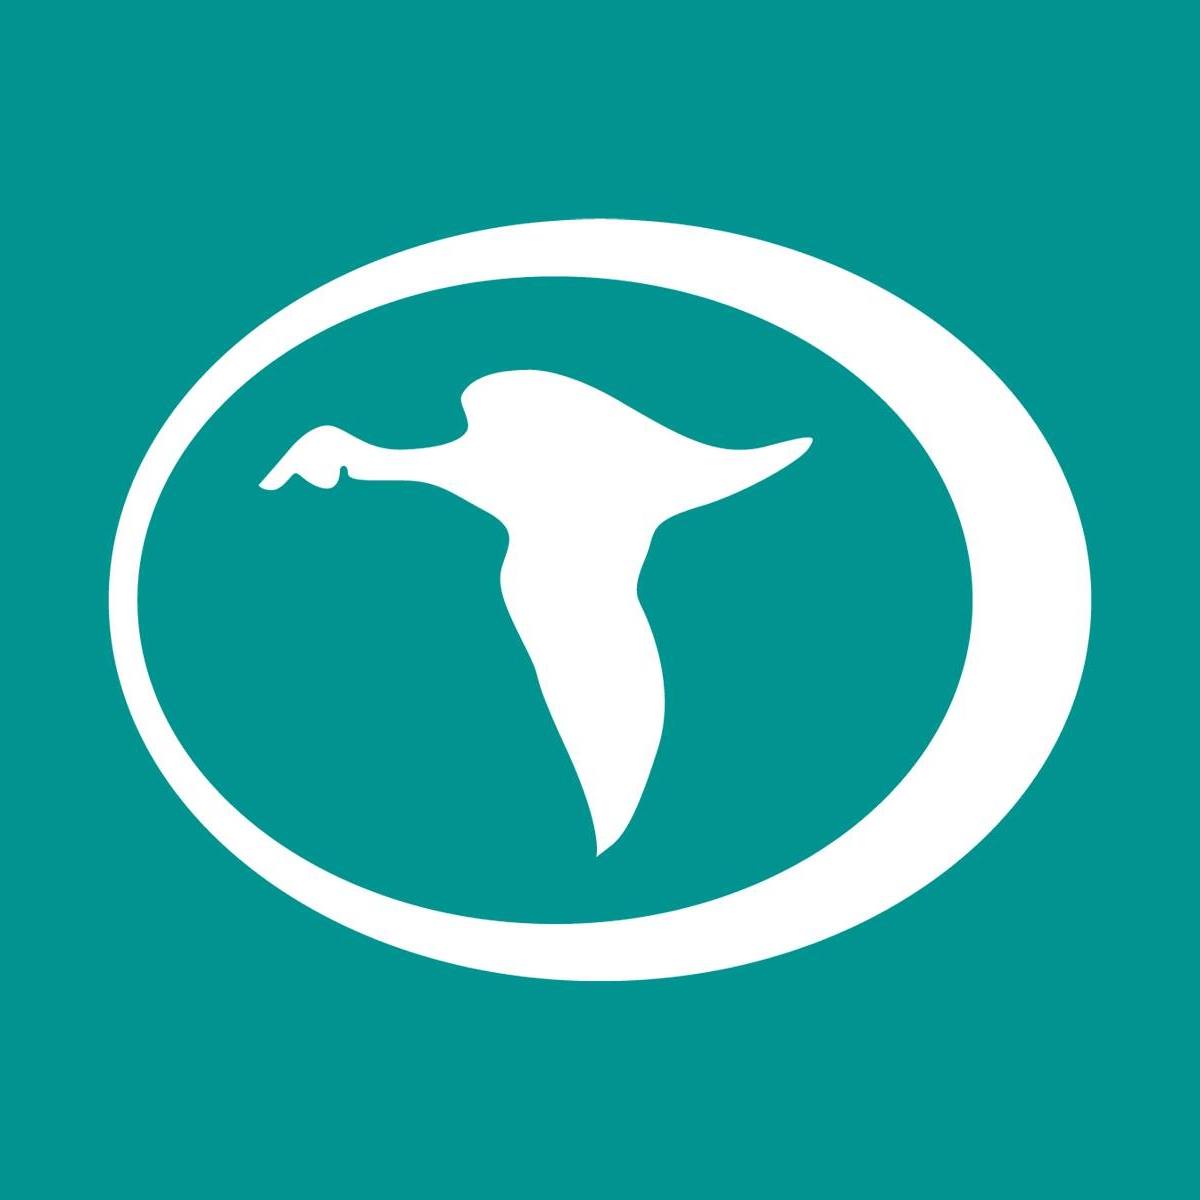 Business logo of Teal Construction Company